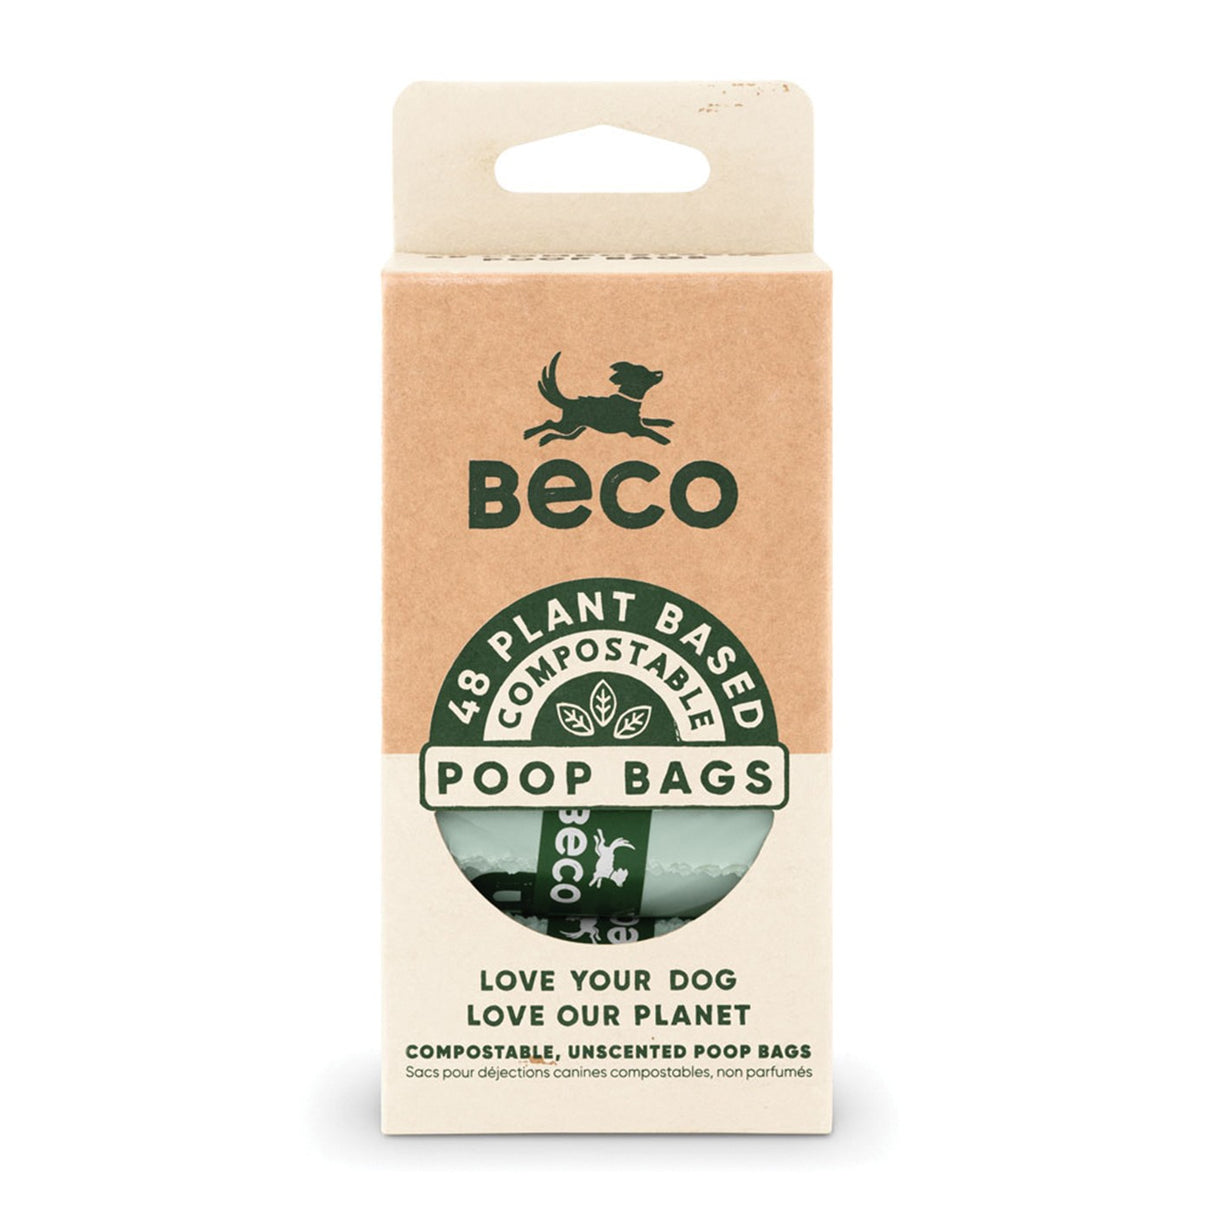 Beco Compostable Unscented Poop Bags - Pack of 48